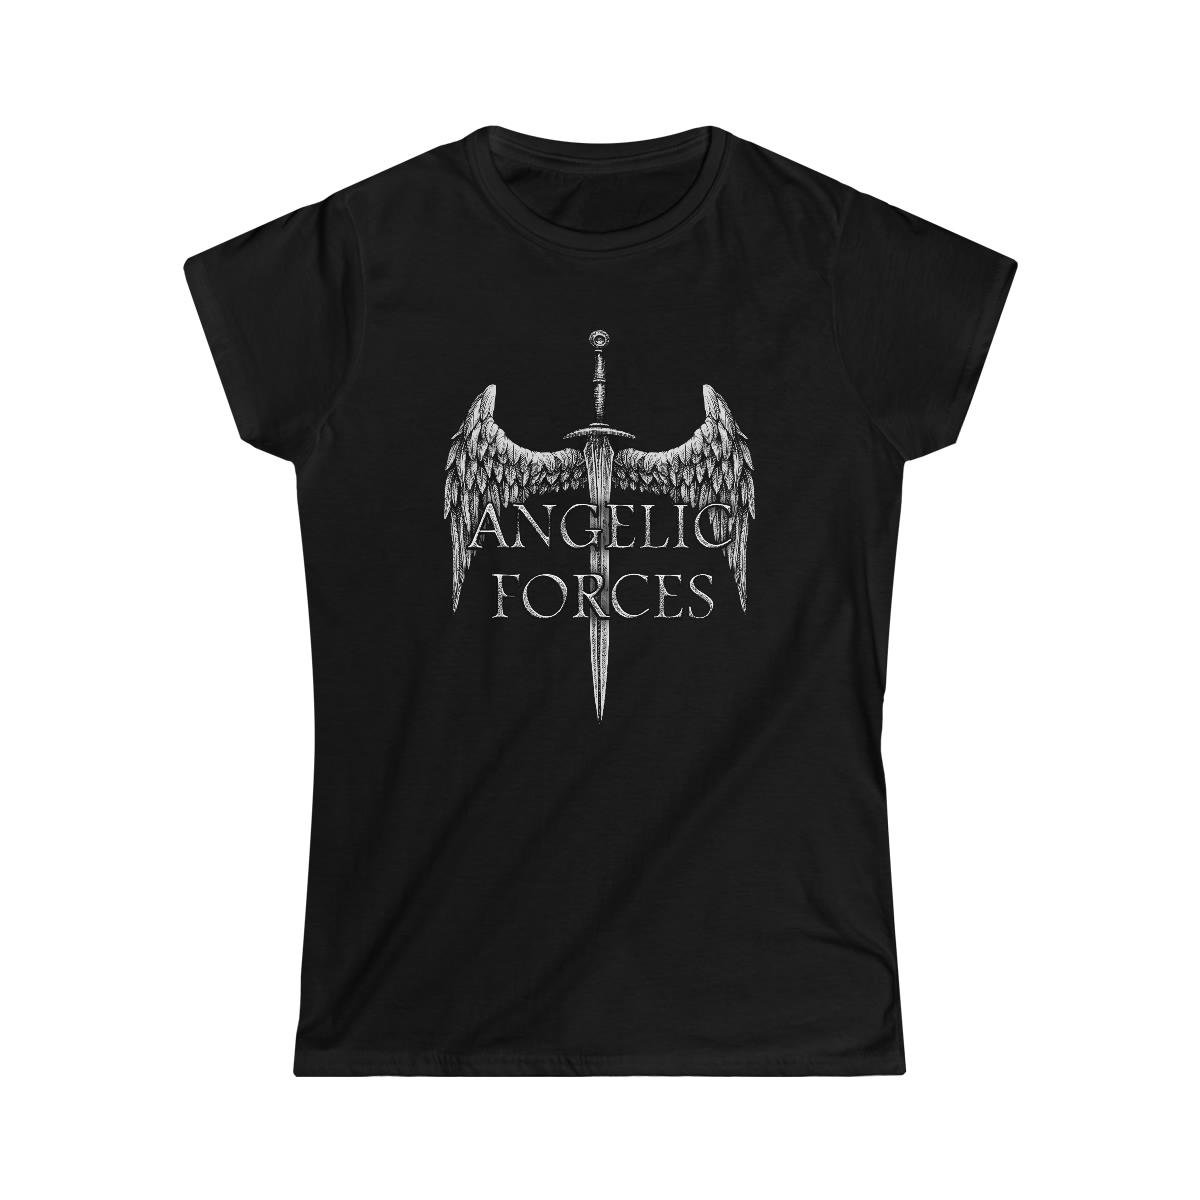 Angelic Forces Sword and Wing Women’s Short Sleeve Tshirt